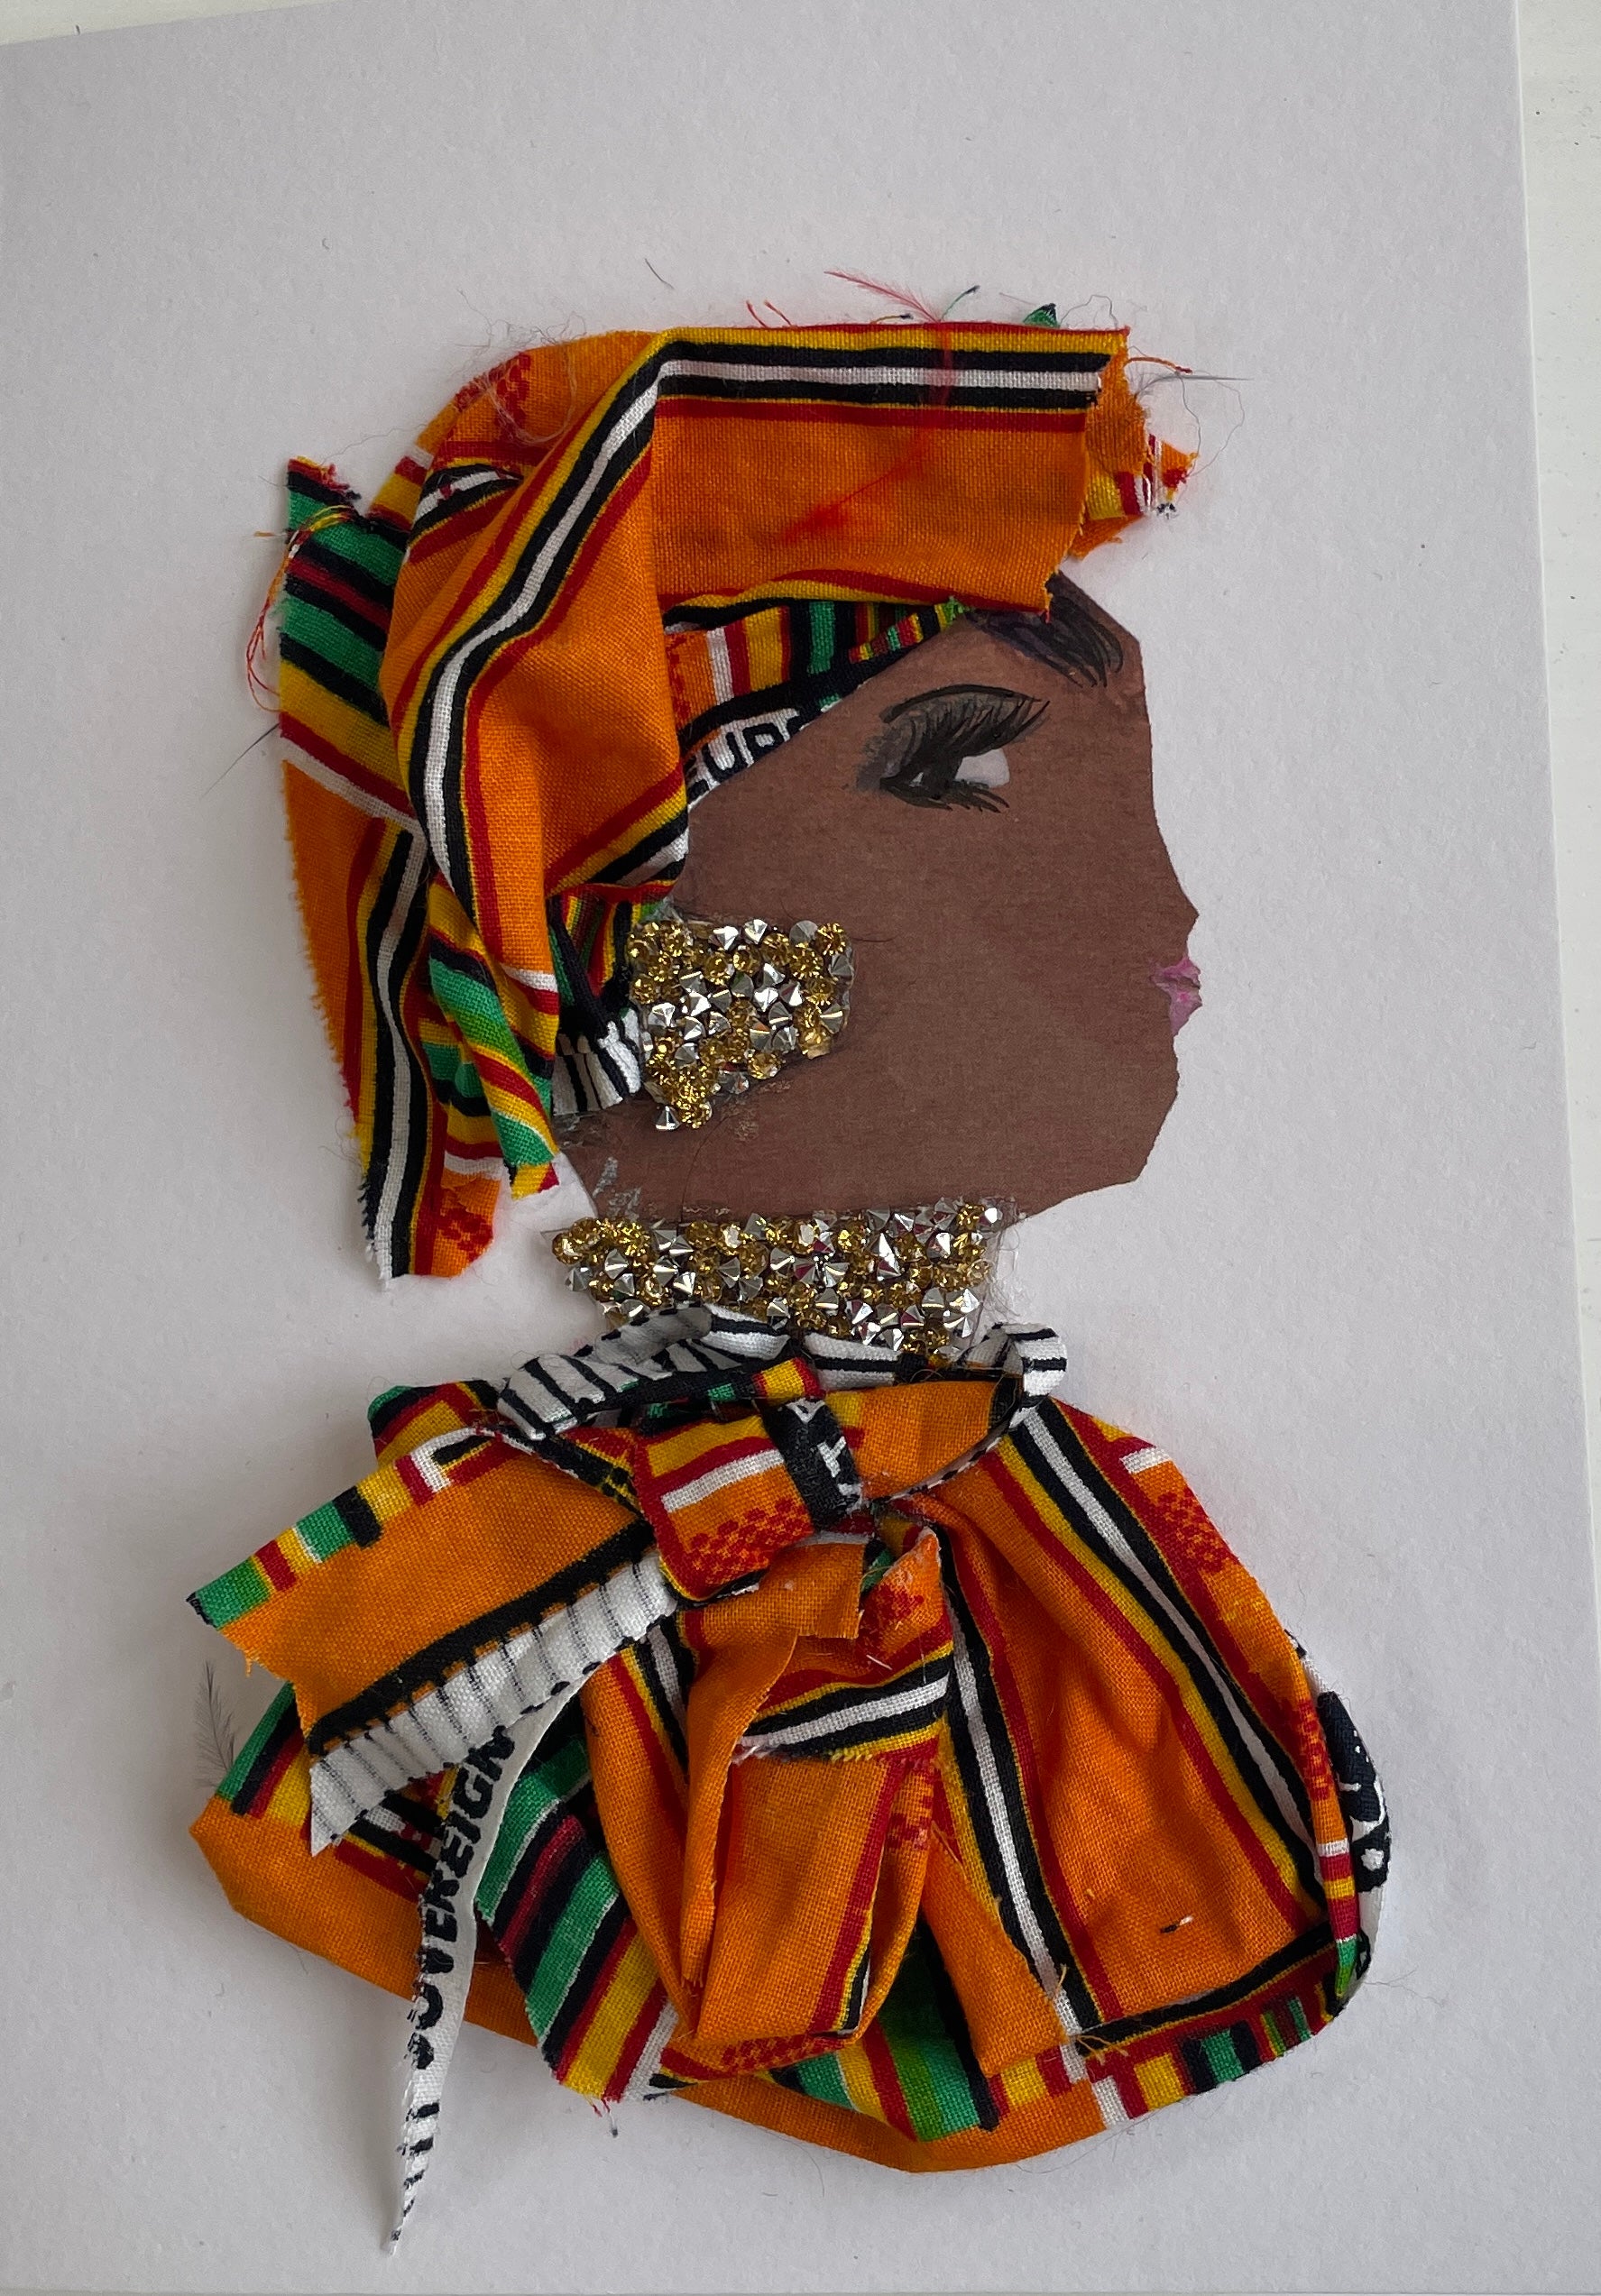 This card is called Goldie. She wears an orange patterned headdress and blouse, and gold diamanté jewellery.  